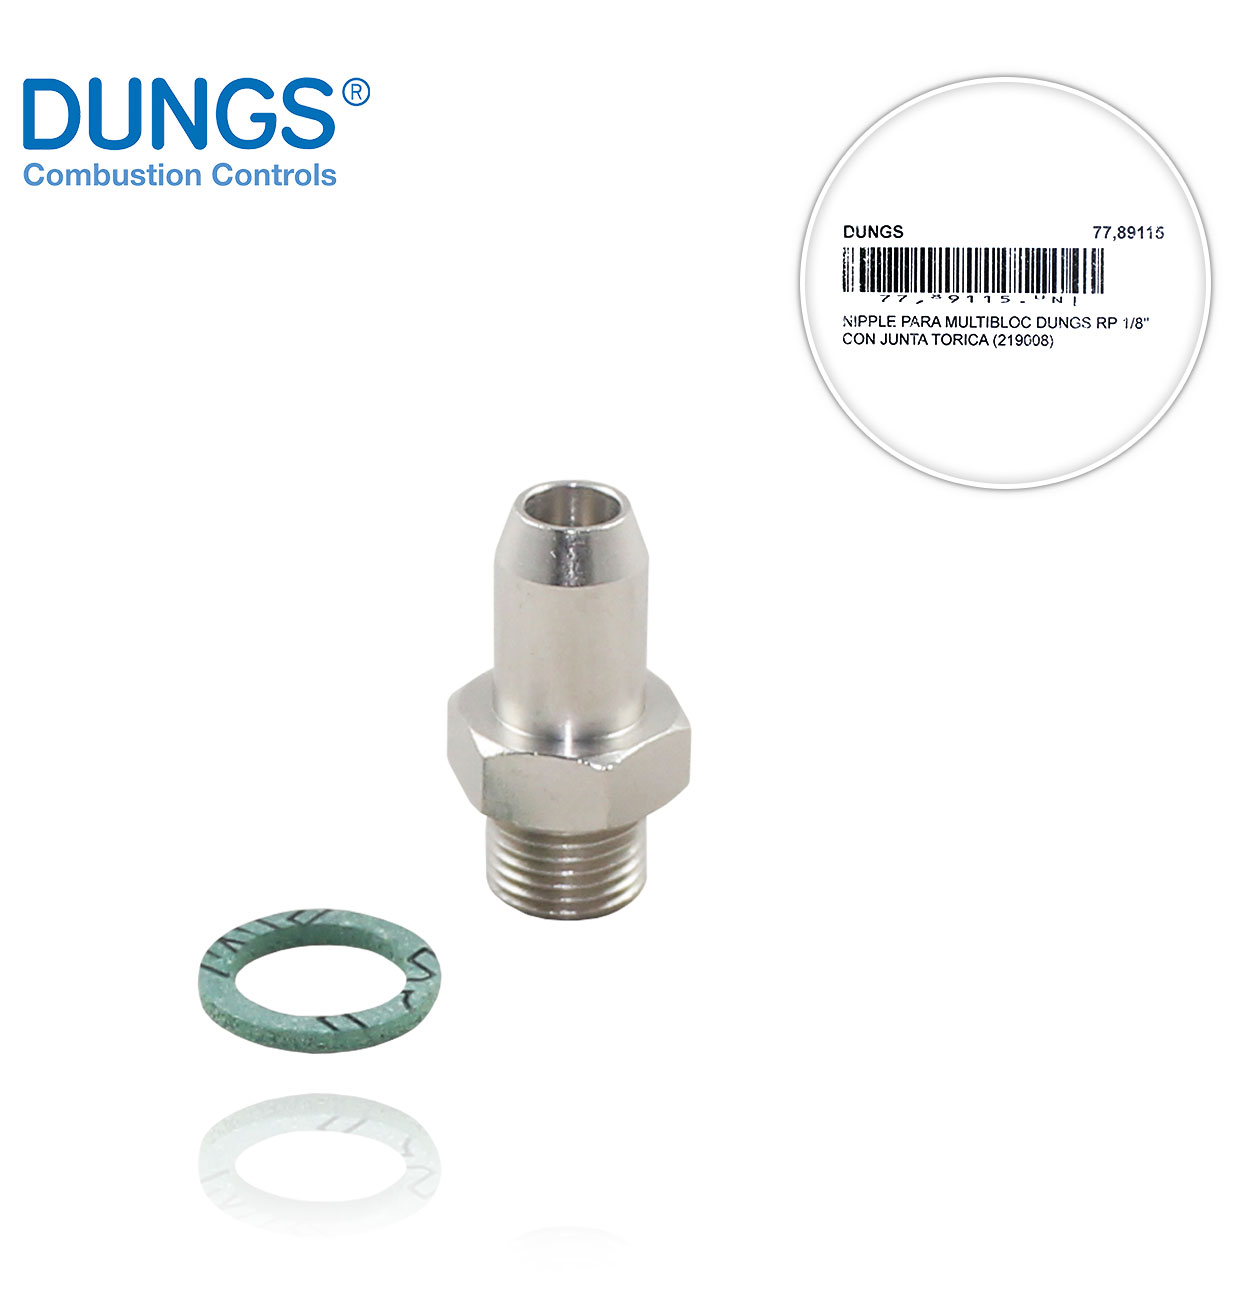 NIPPLE FOR DUNGS RP 1/8" MULTIBLOCK WITH O-RING GASKET (219008)